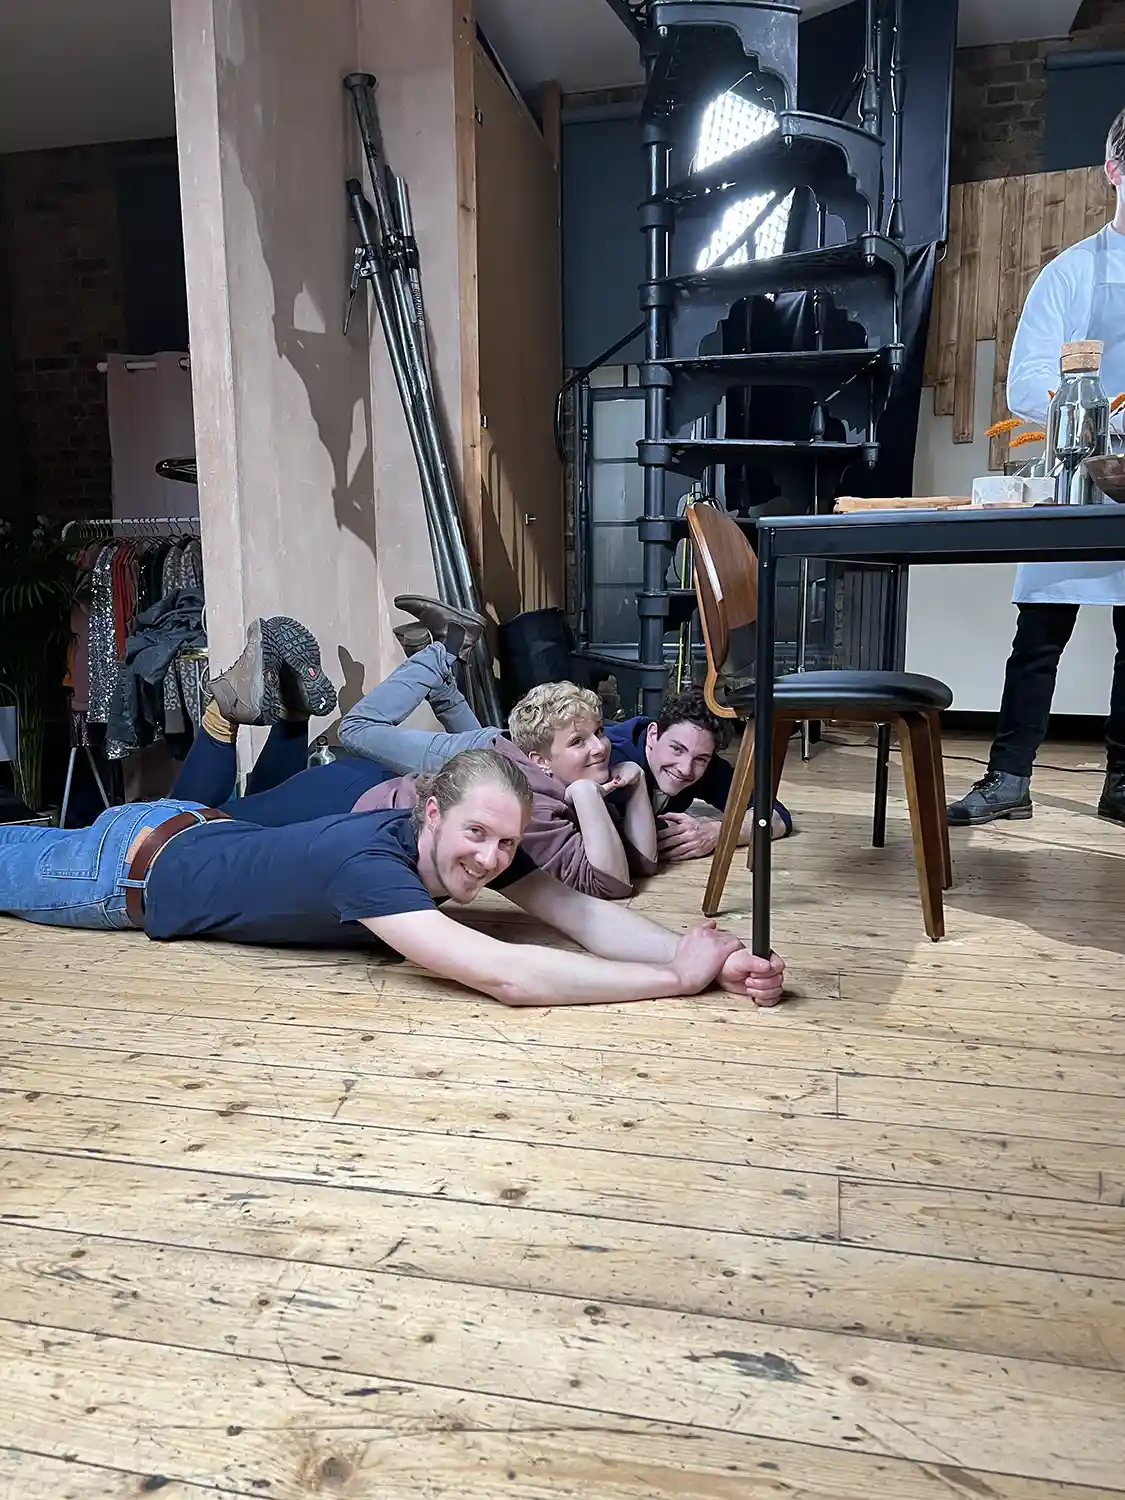 image from the set of a startup video production. 3 people are laying on the floor so they can move furniture so it looks like it's moving magically.